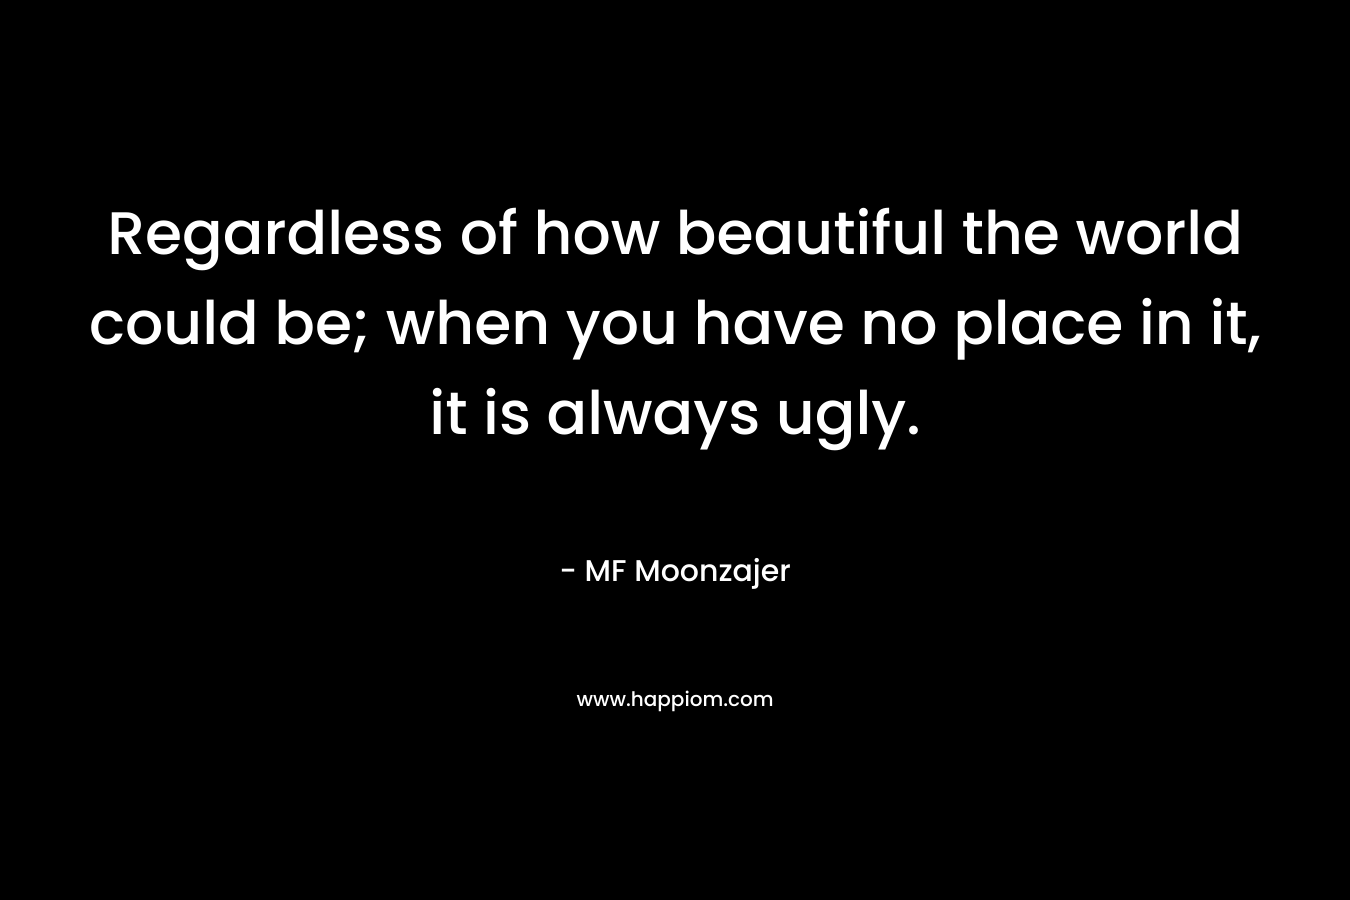 Regardless of how beautiful the world could be; when you have no place in it, it is always ugly.